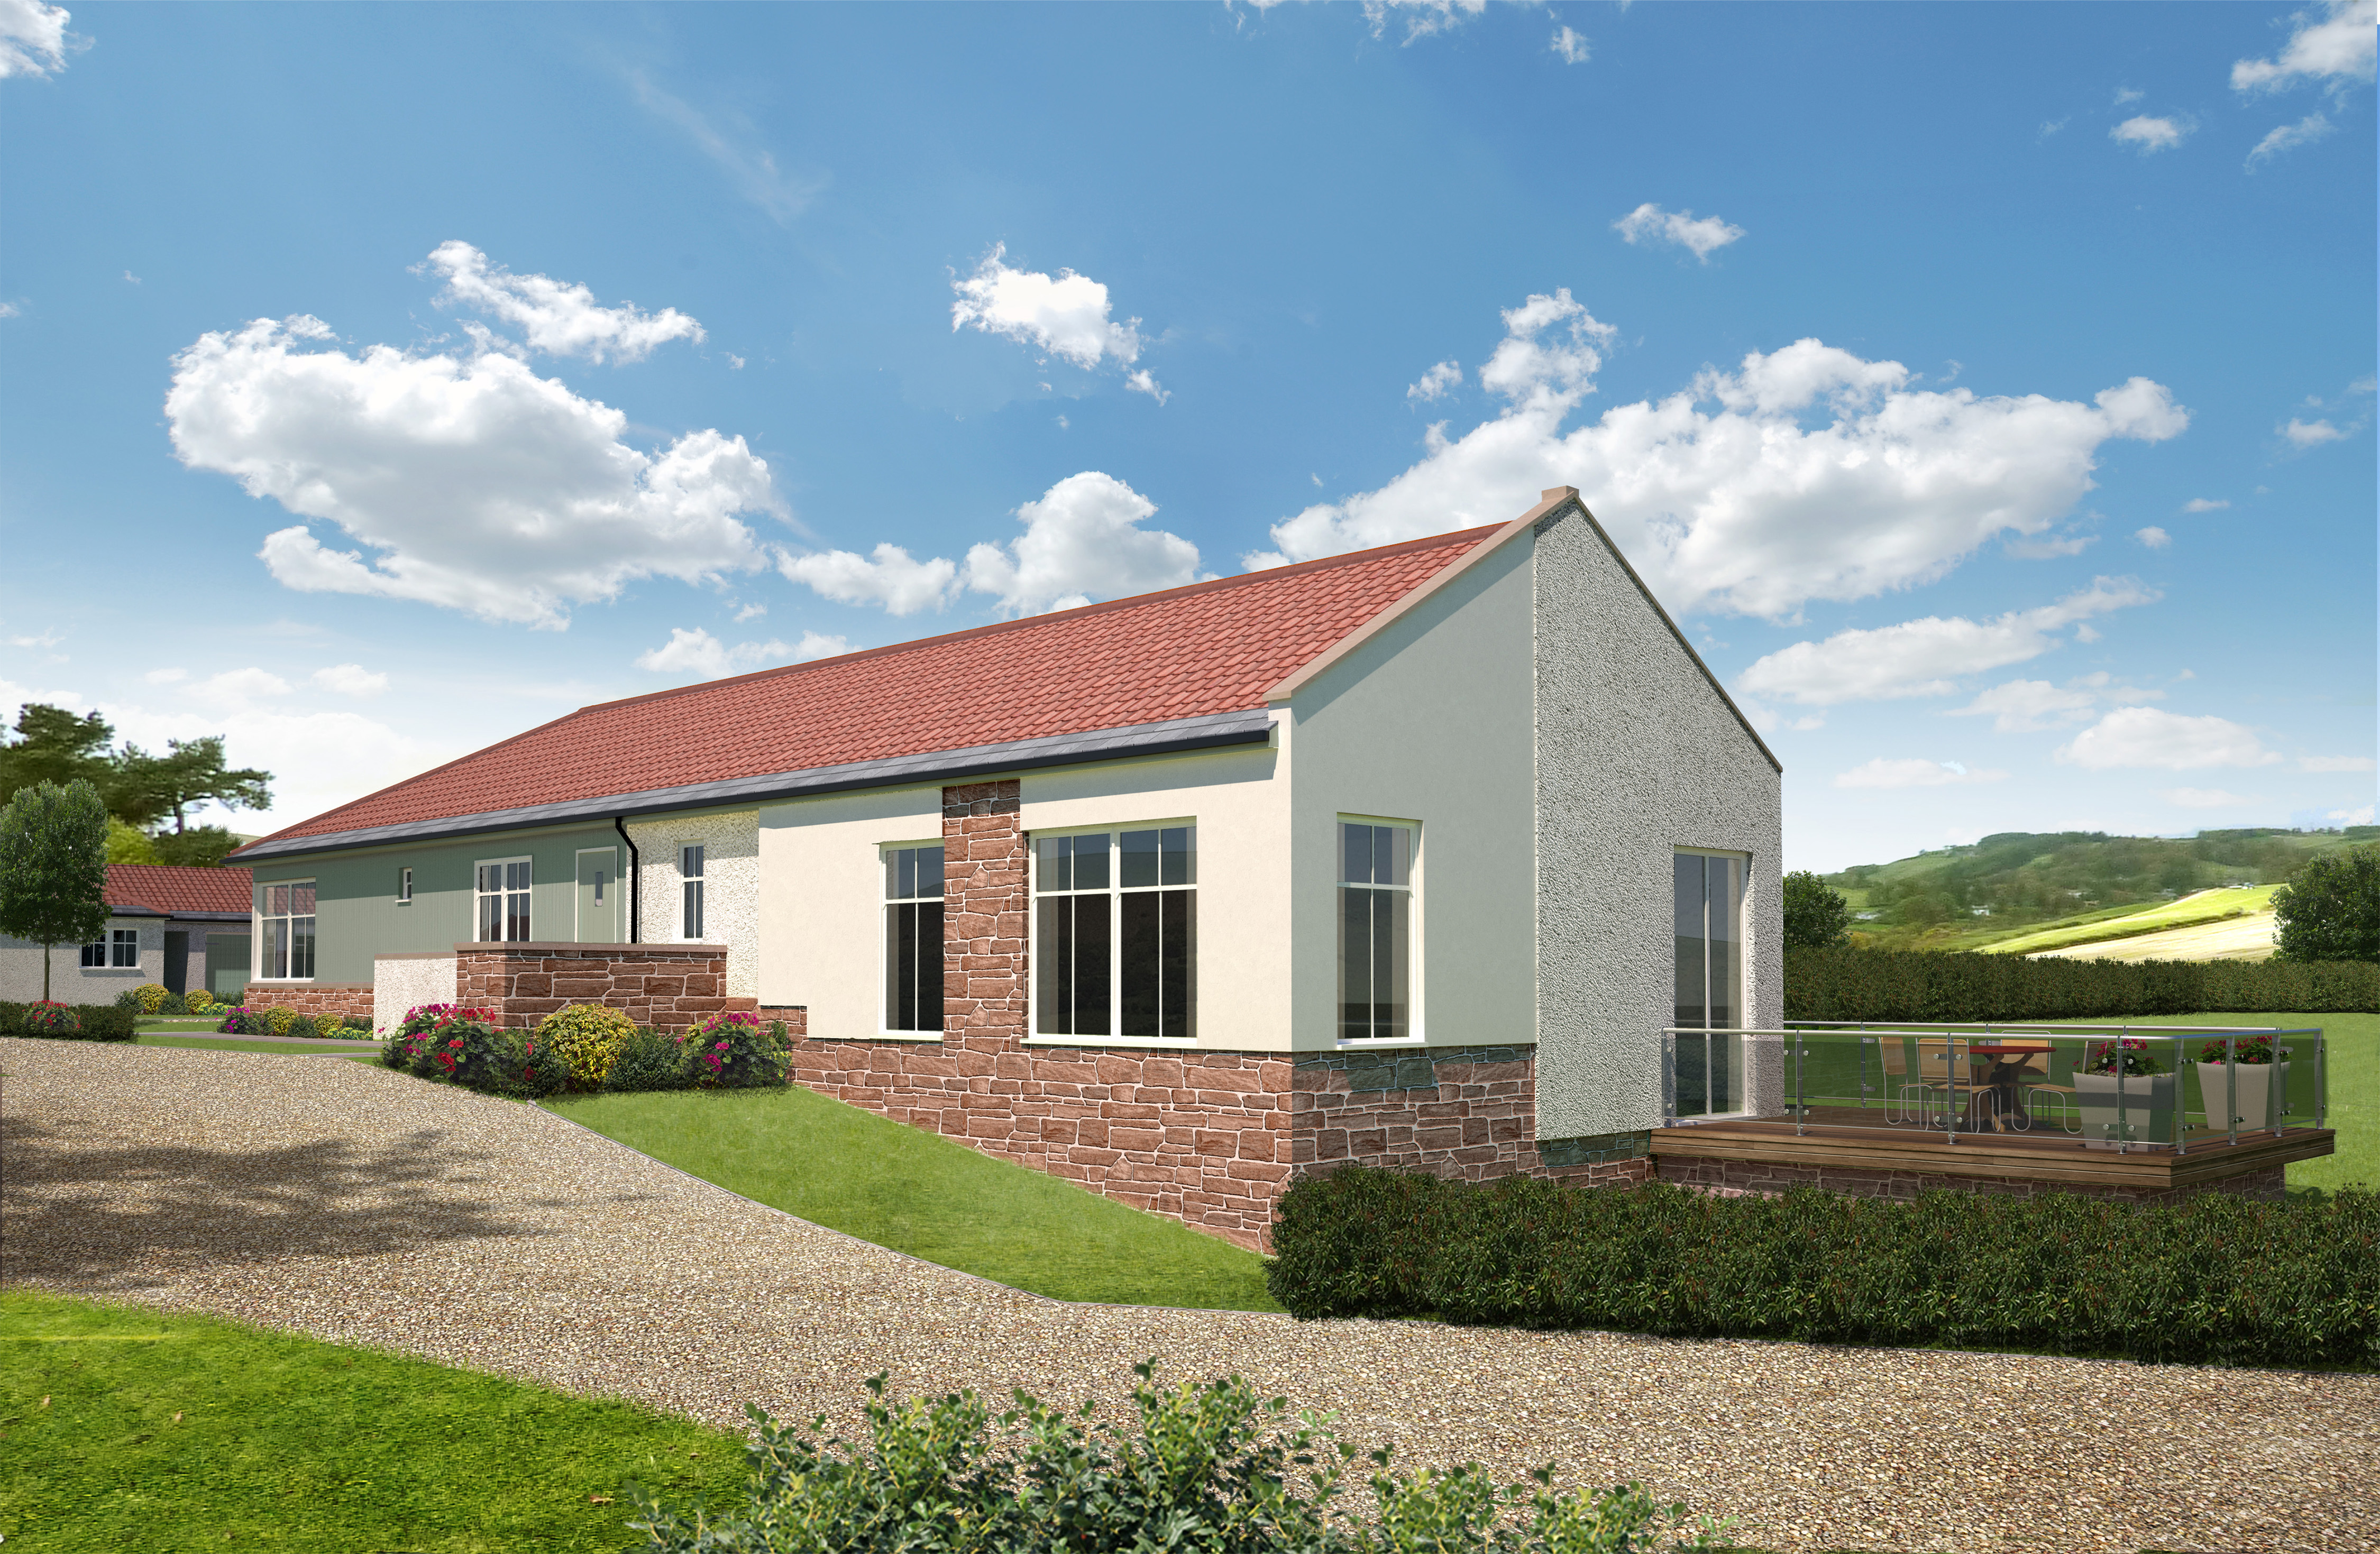 PLOT 1 IS NOW SOLD